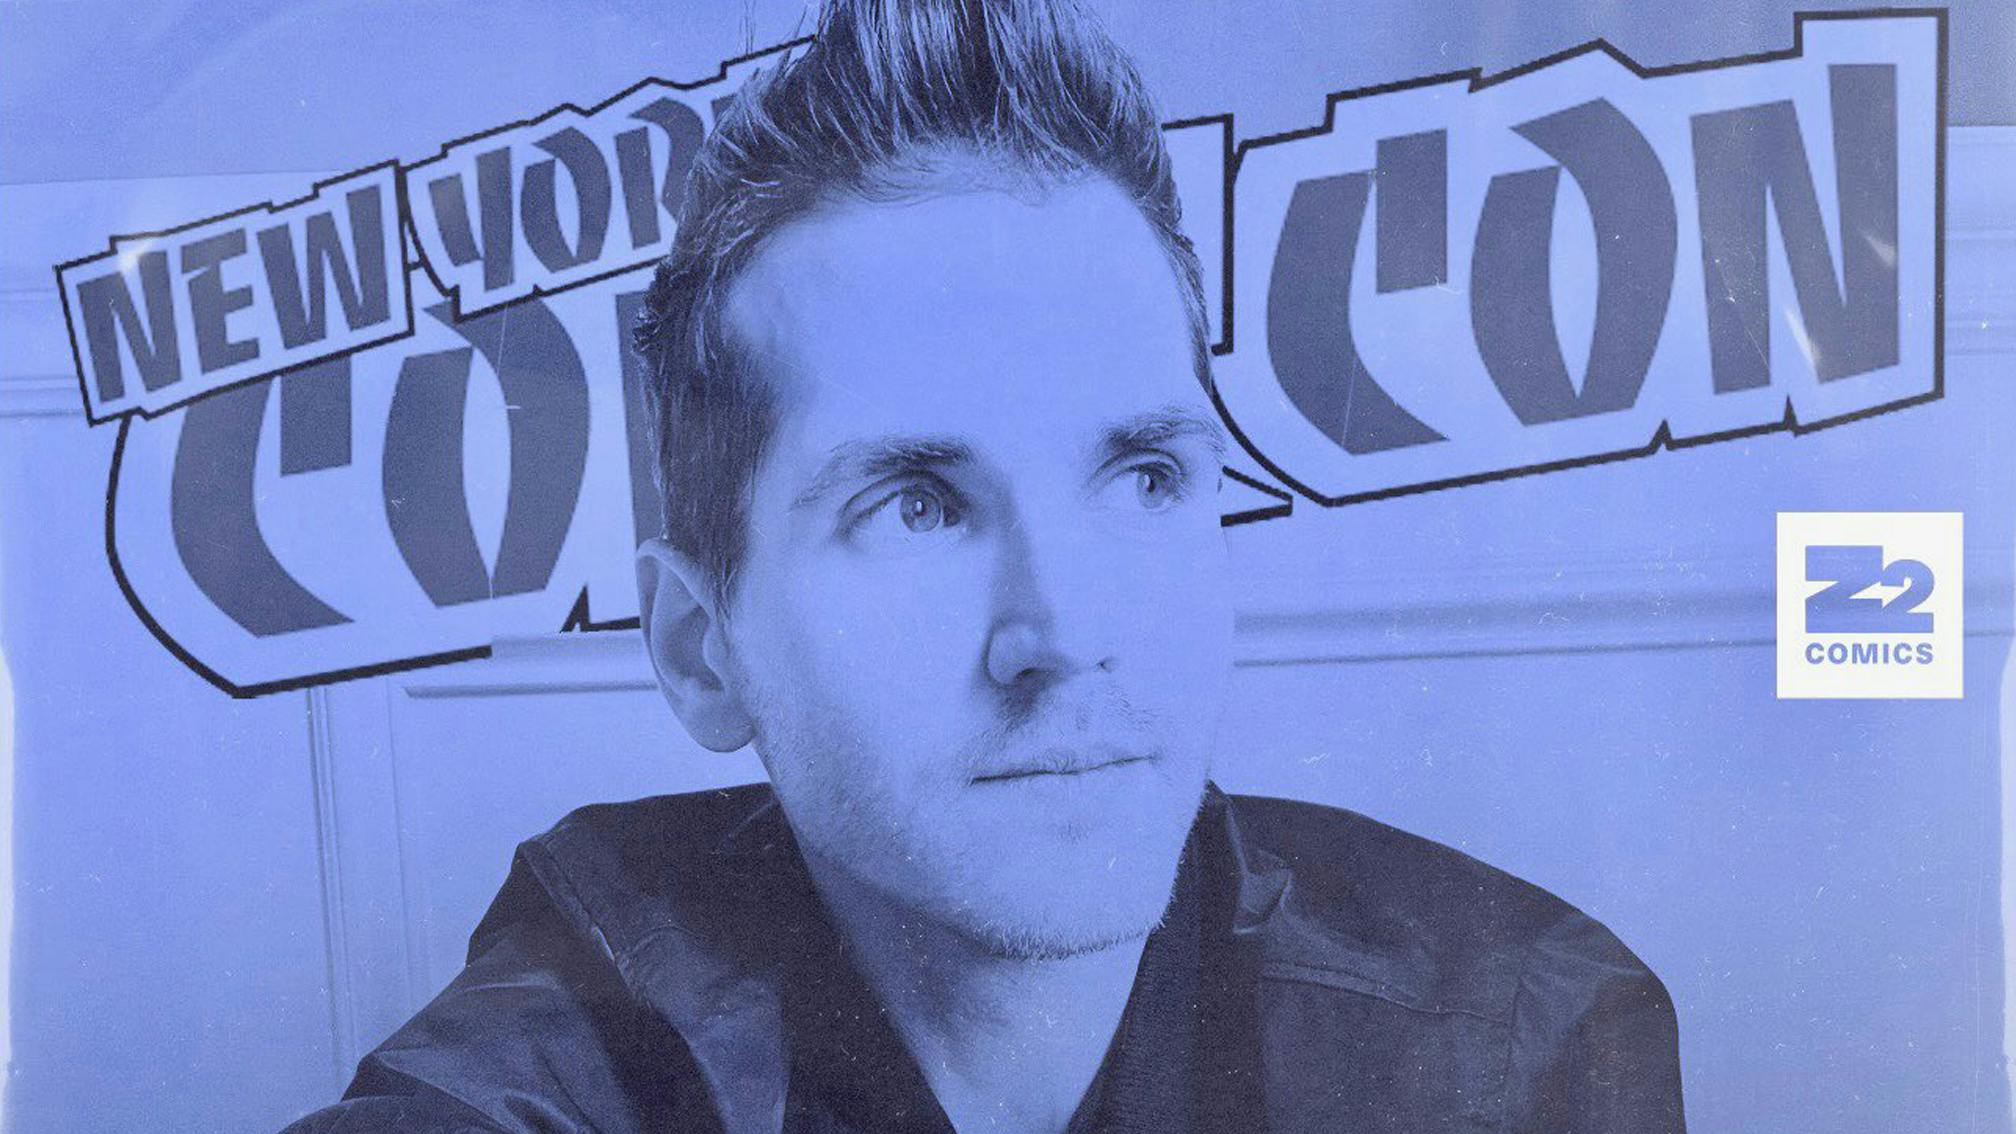 Mikey Way to guest at New York Comic Con this Friday